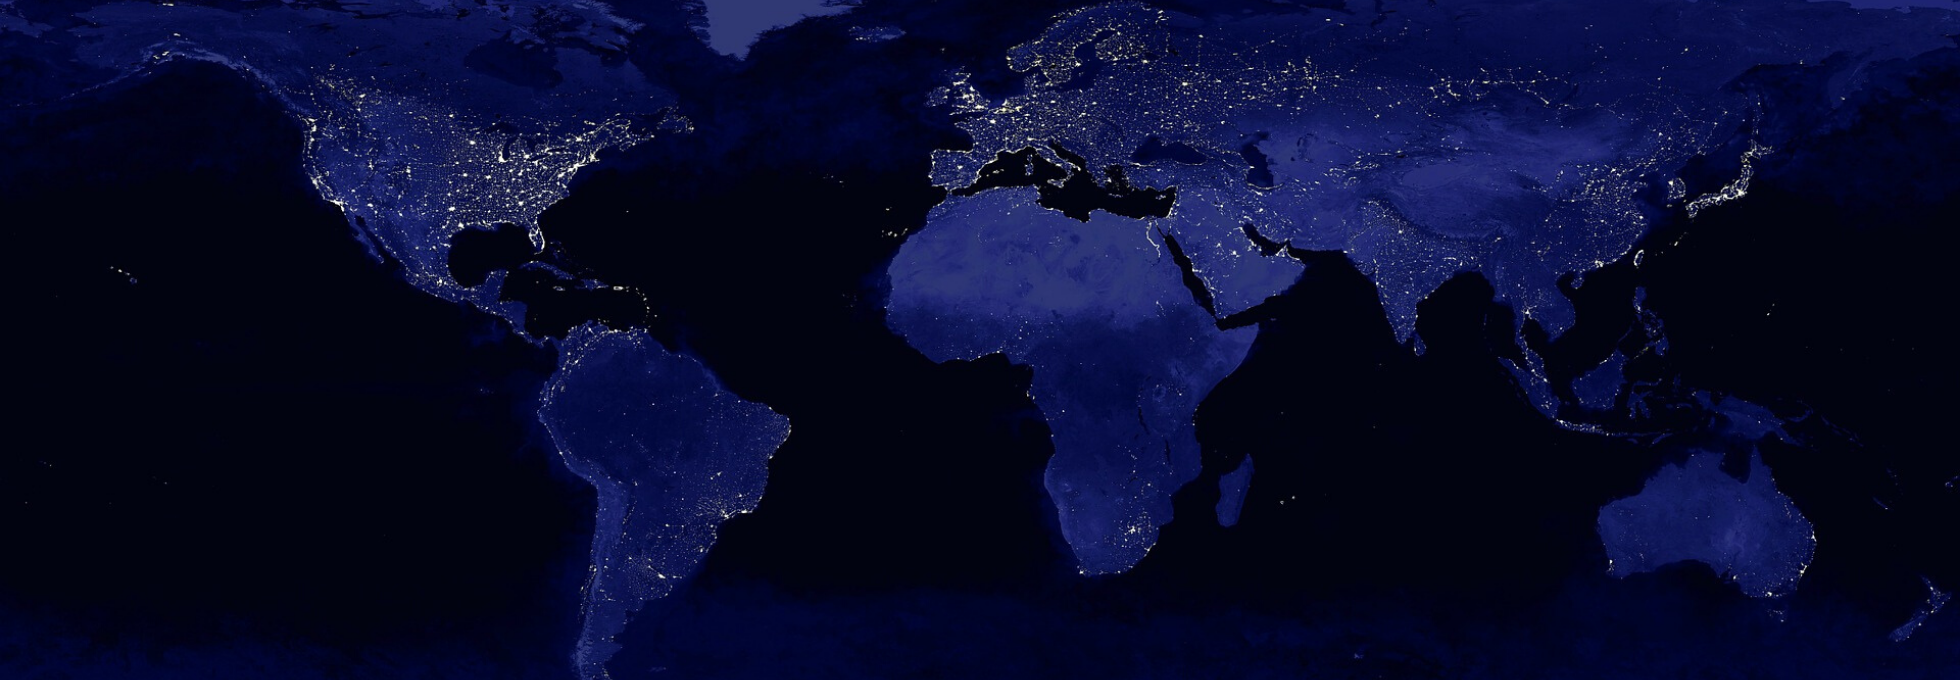 Lights on earth from outer space